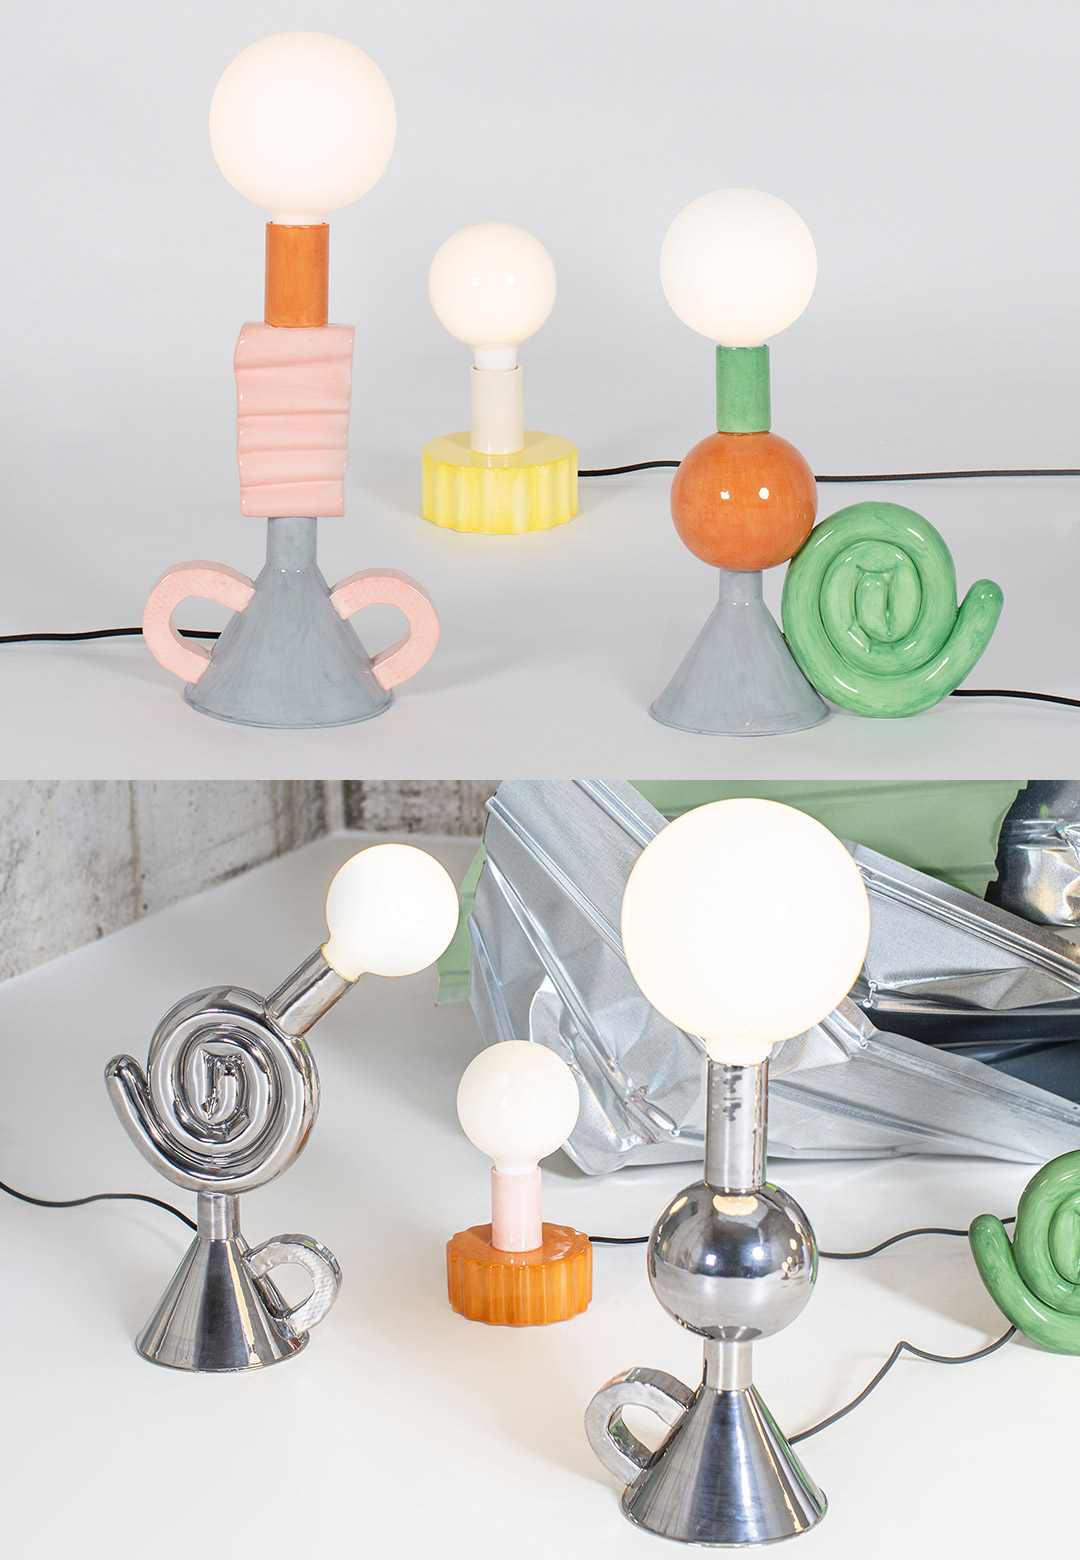 Natascha Madeiski salvages household objects to build ‘Flaming Stars’ lamps